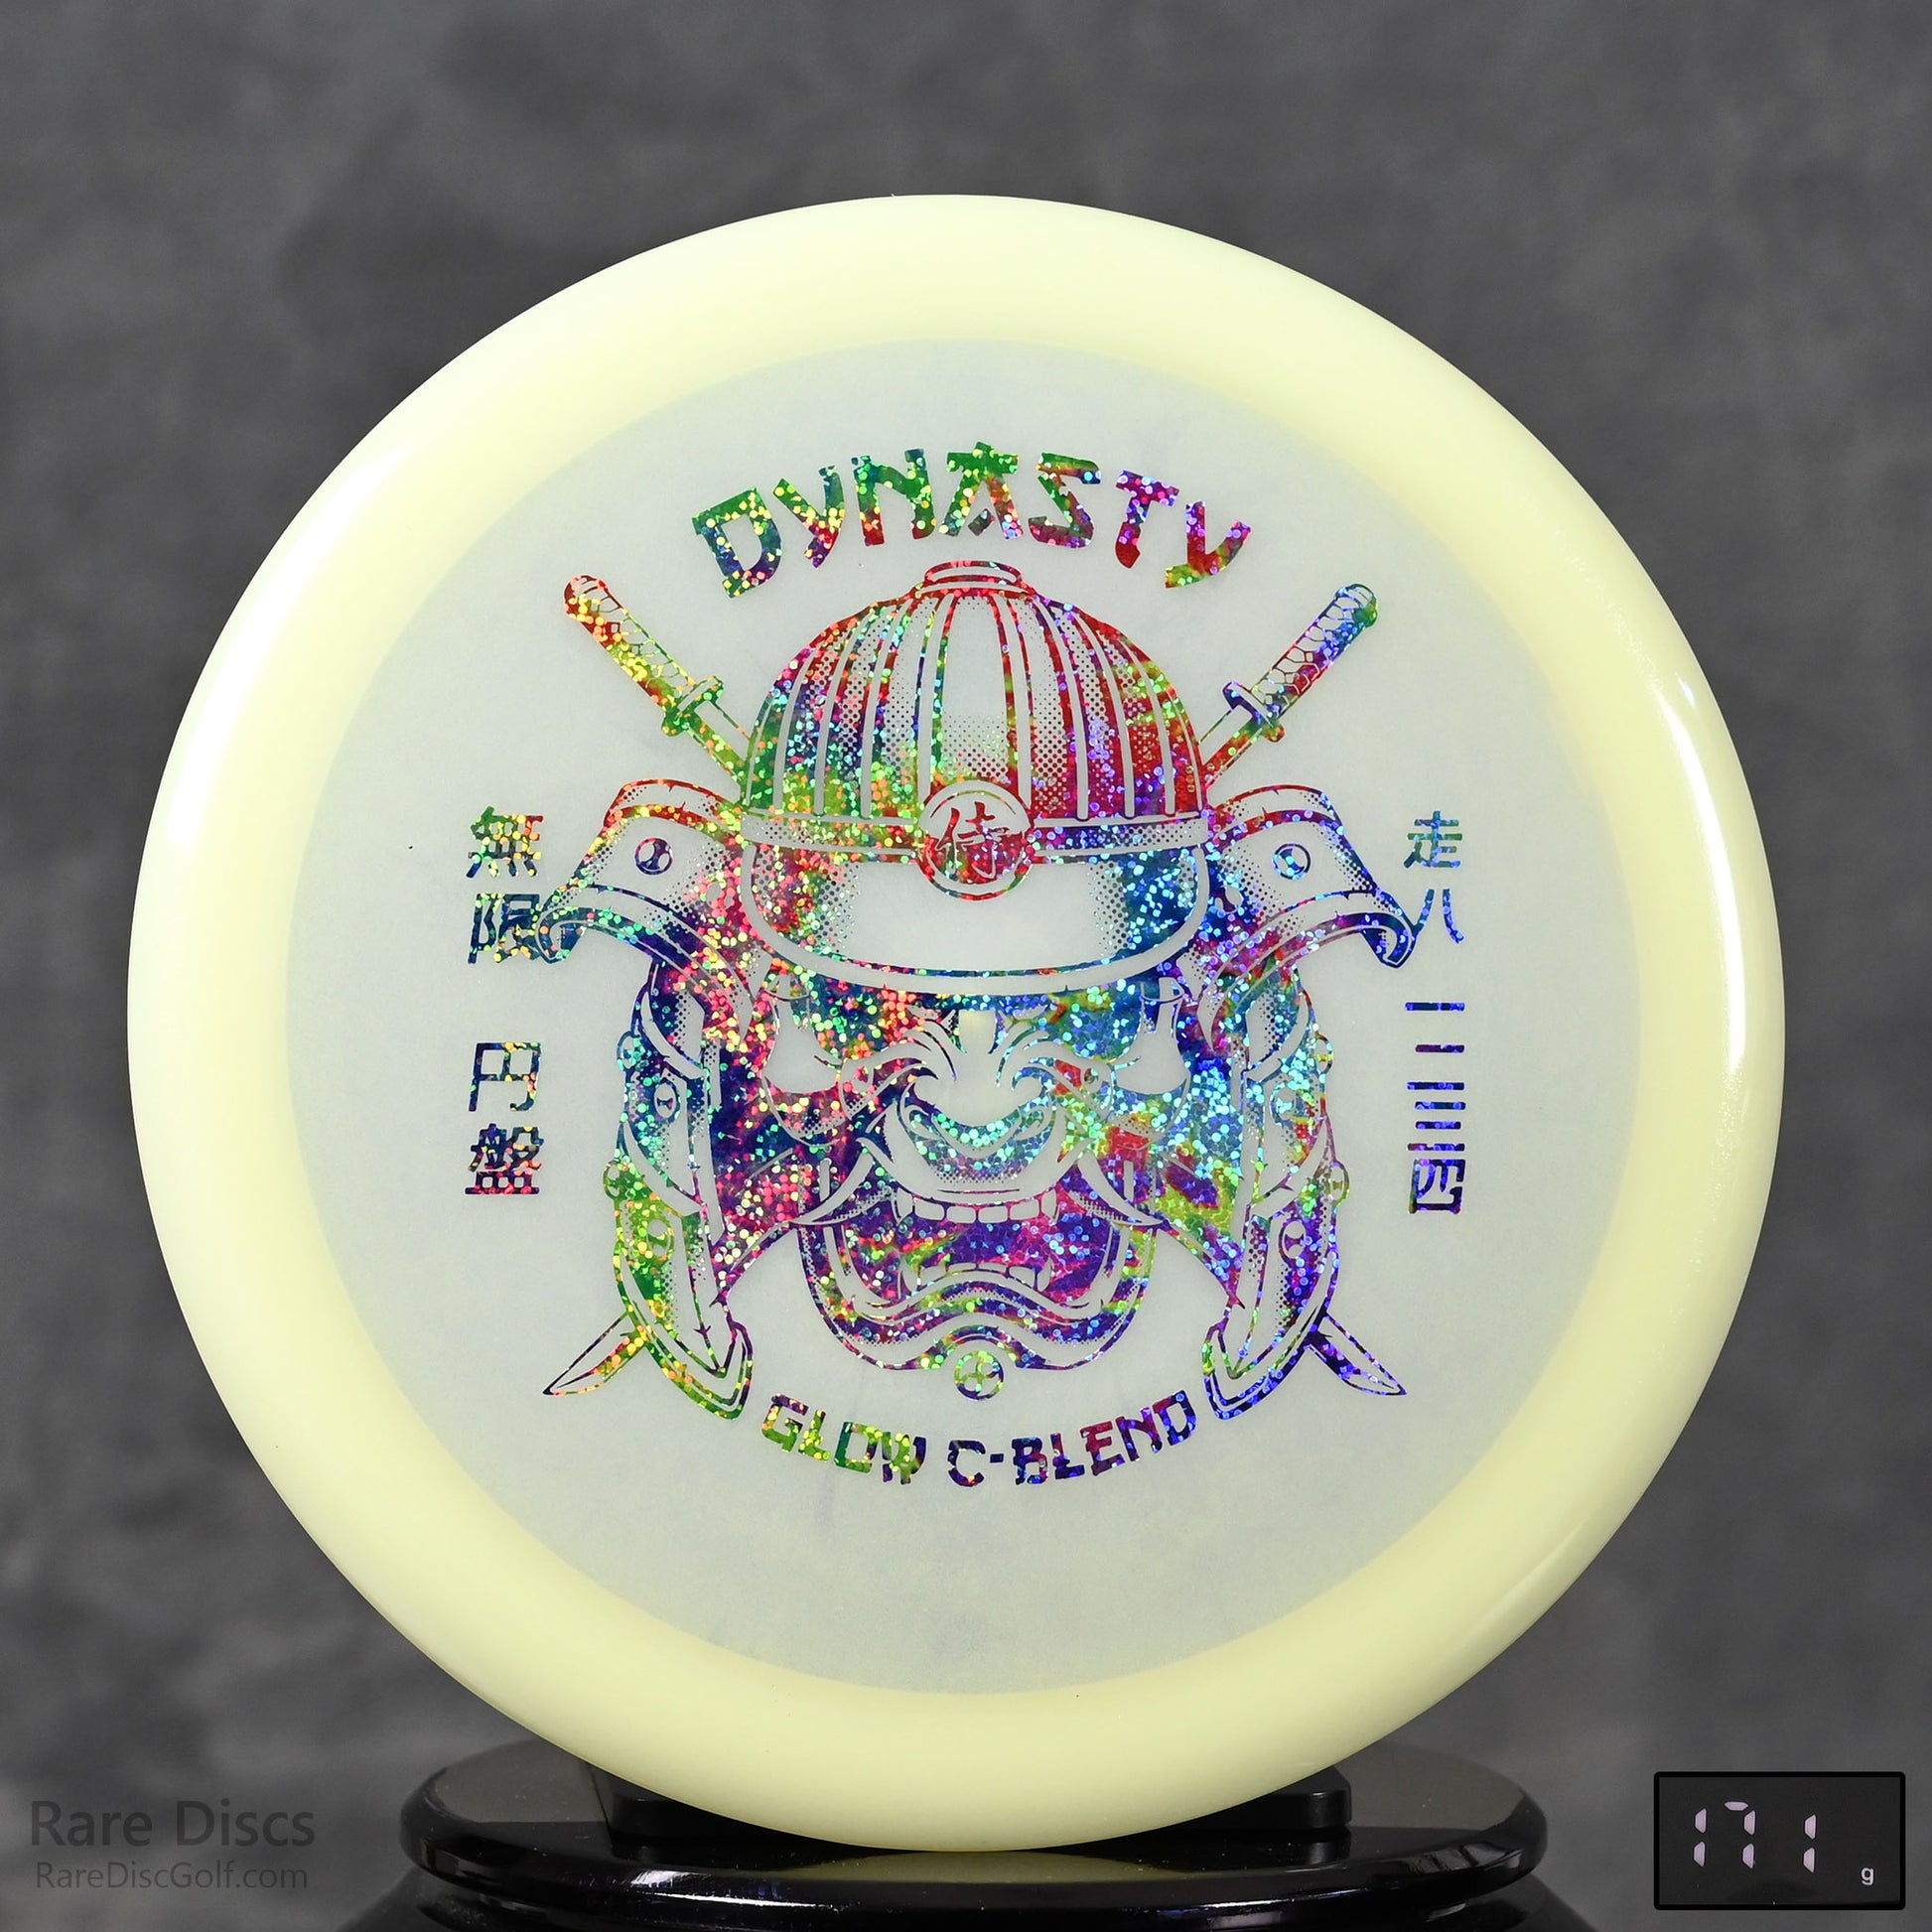 Buy the Infinite Discs Glow Dynasty in Canada at Rare Discs special edition Pirate Ninja